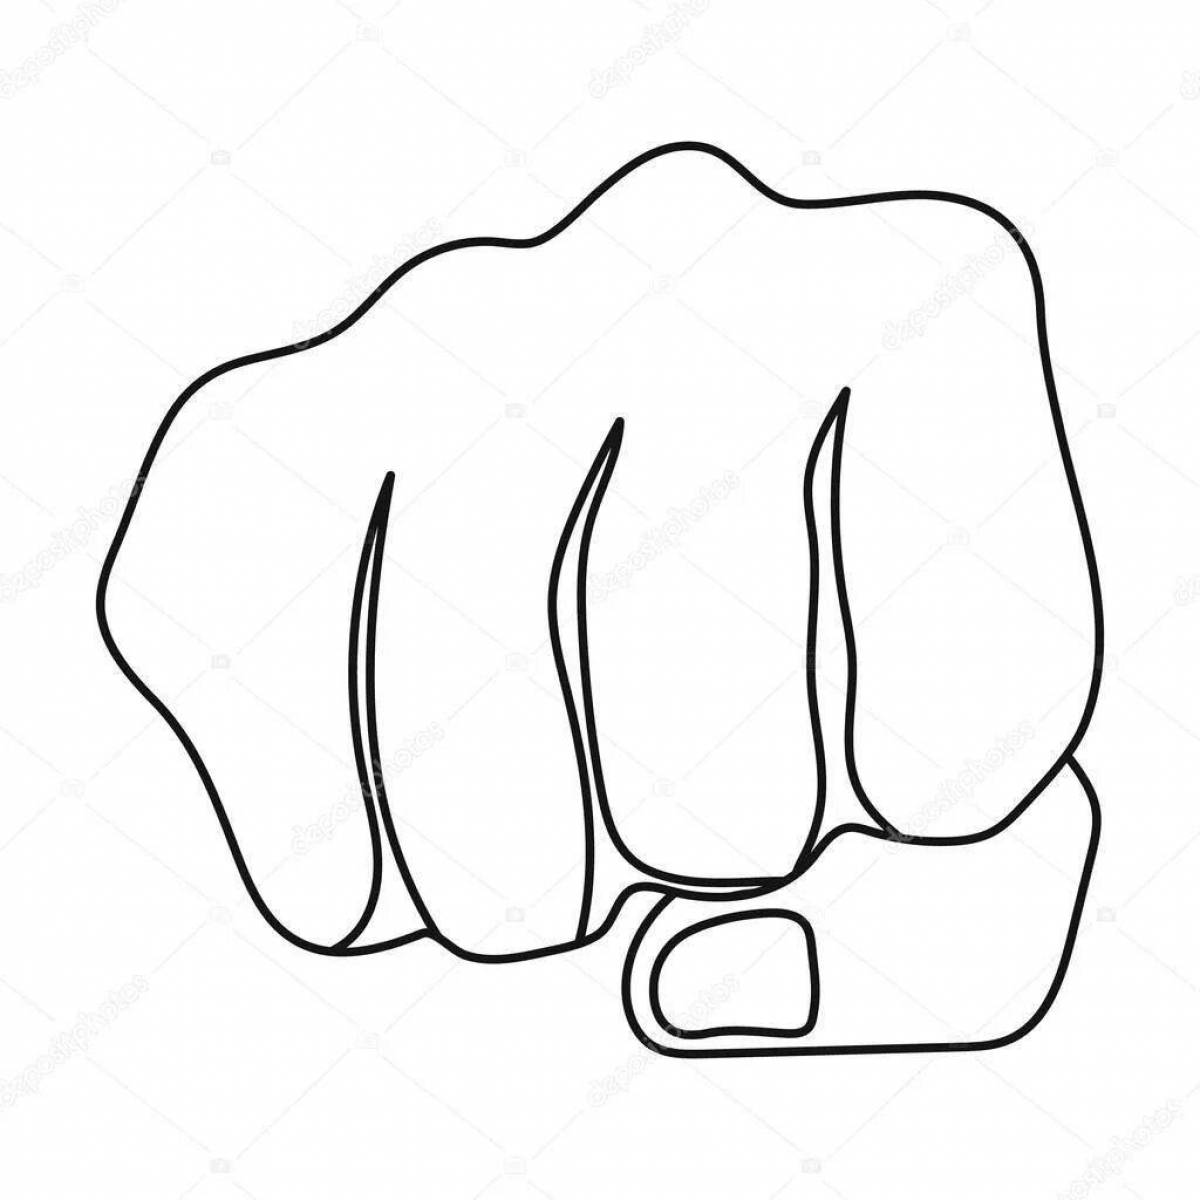 Colorful fist coloring page